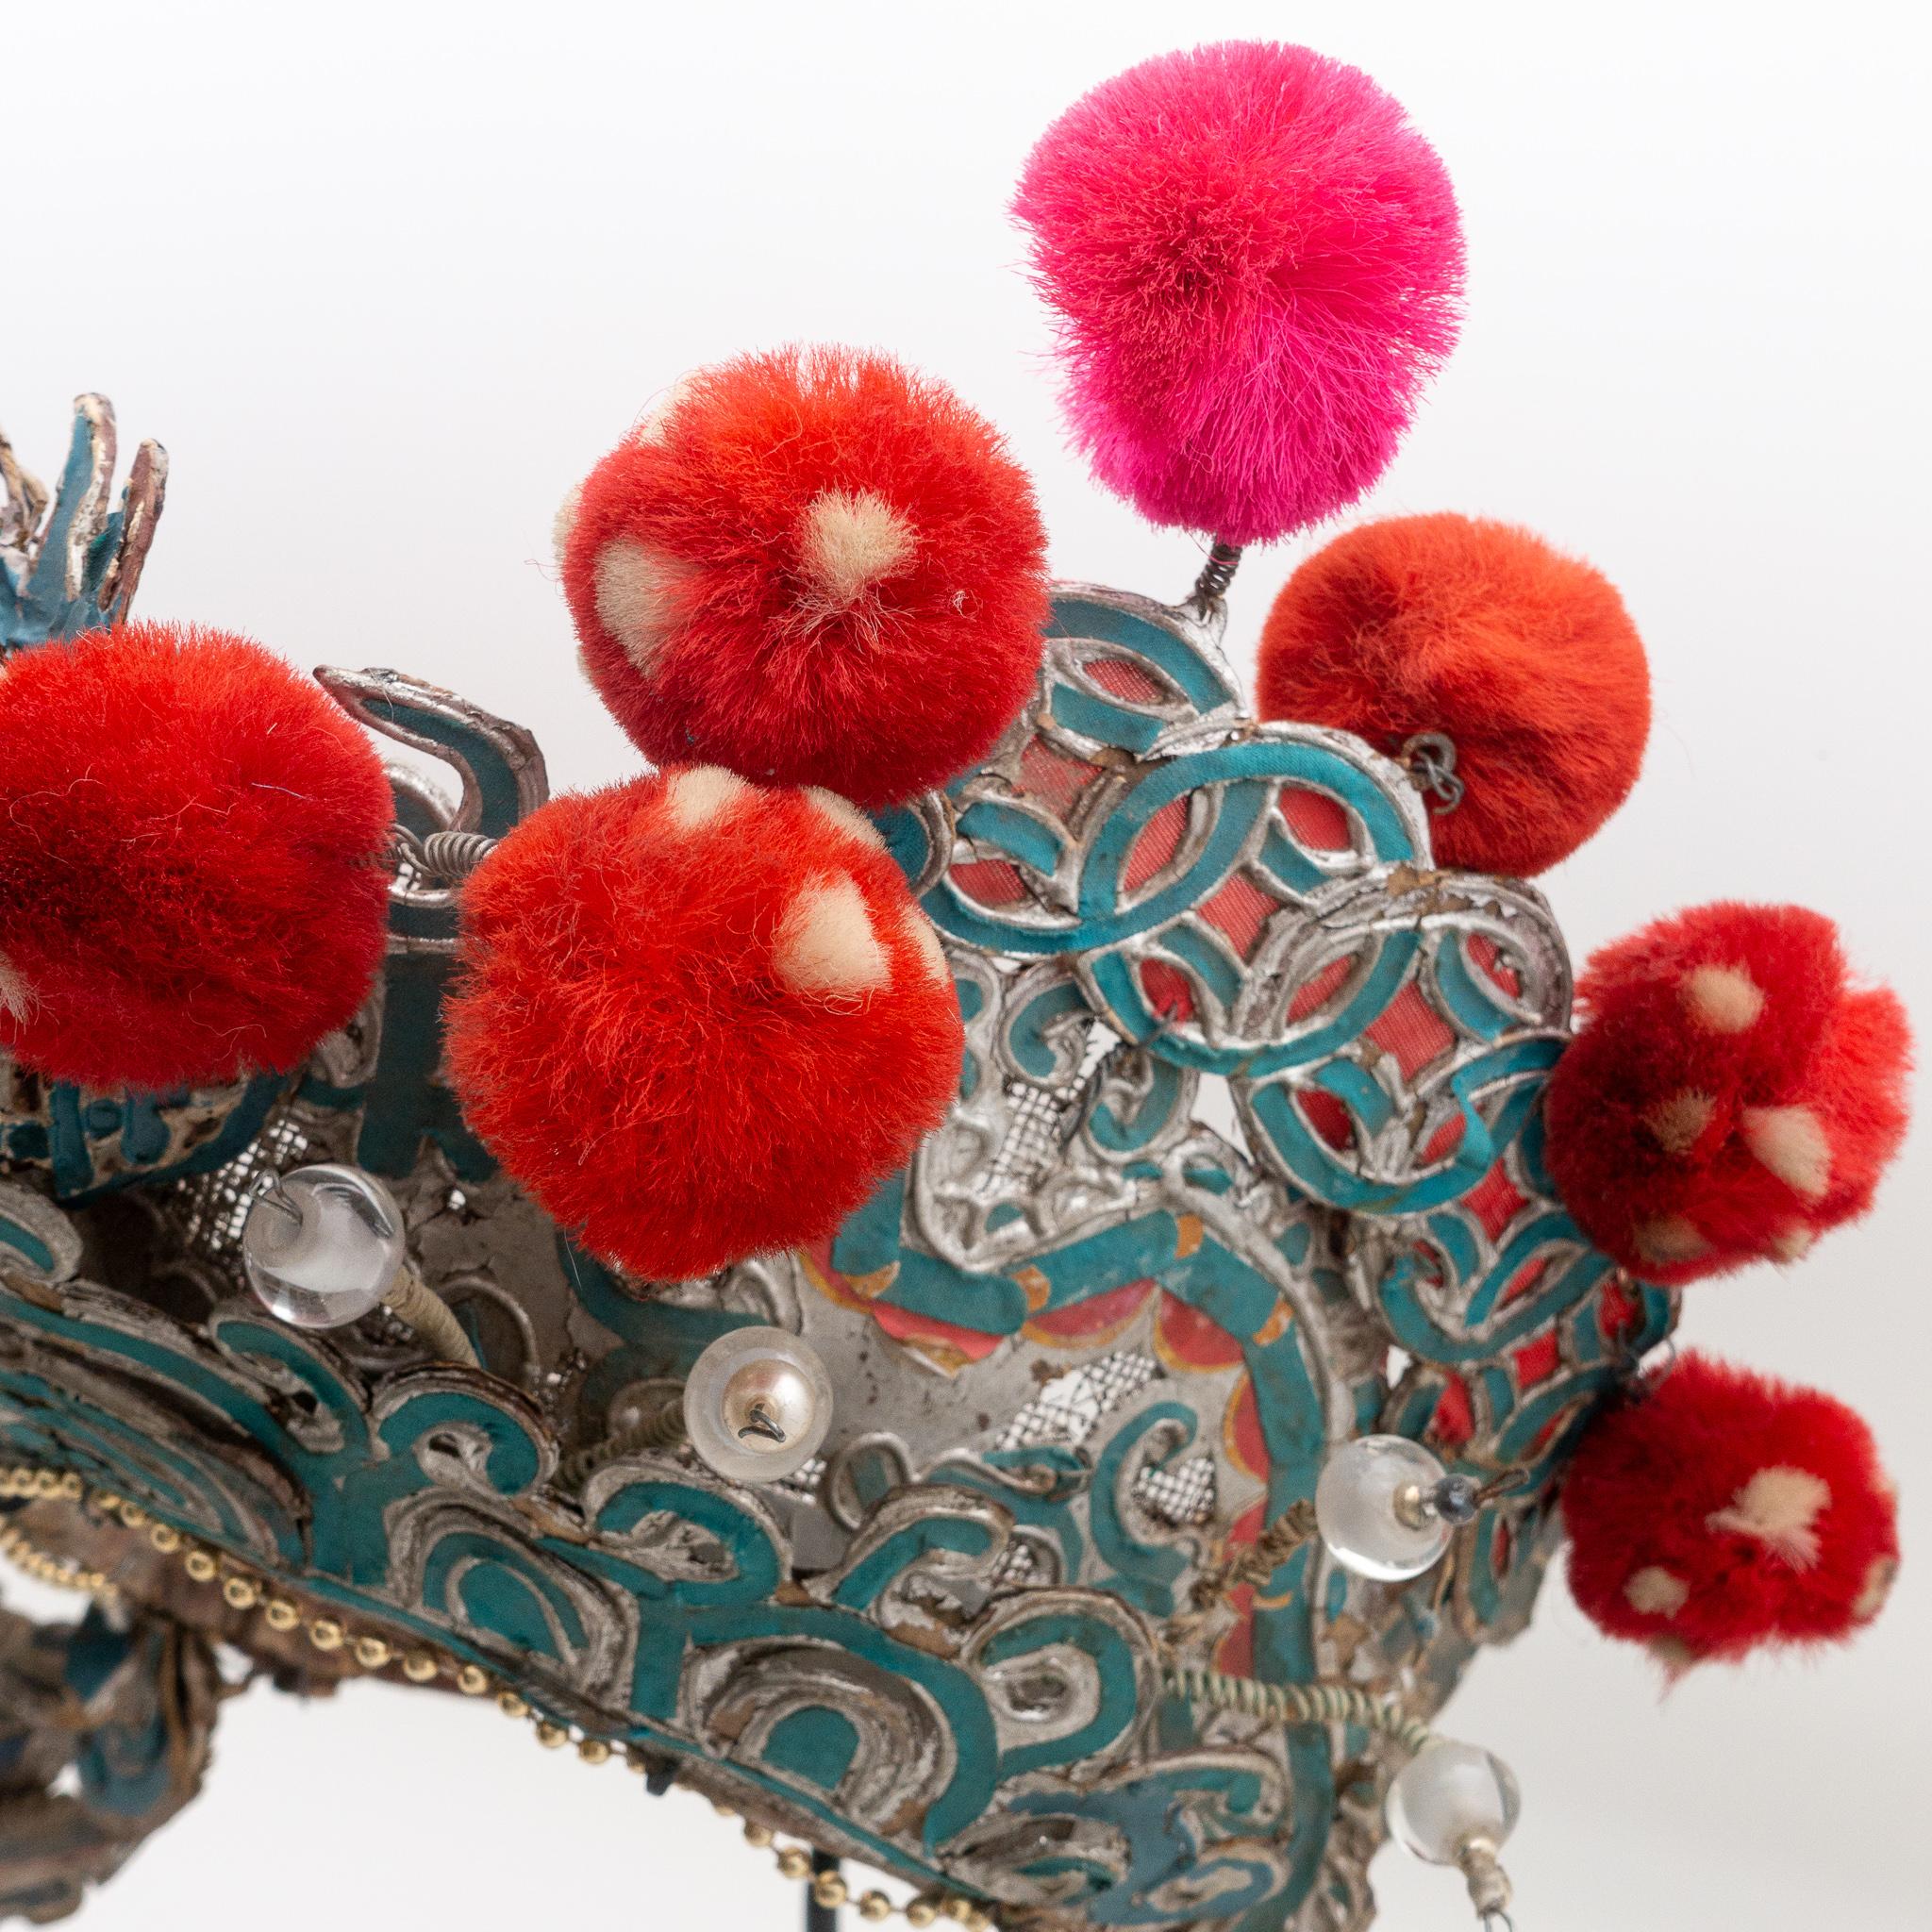 Metal Antique Chinese Theatre Opera Headdress, Turquoise/Silver, Red/Fuchsia Pom-Poms